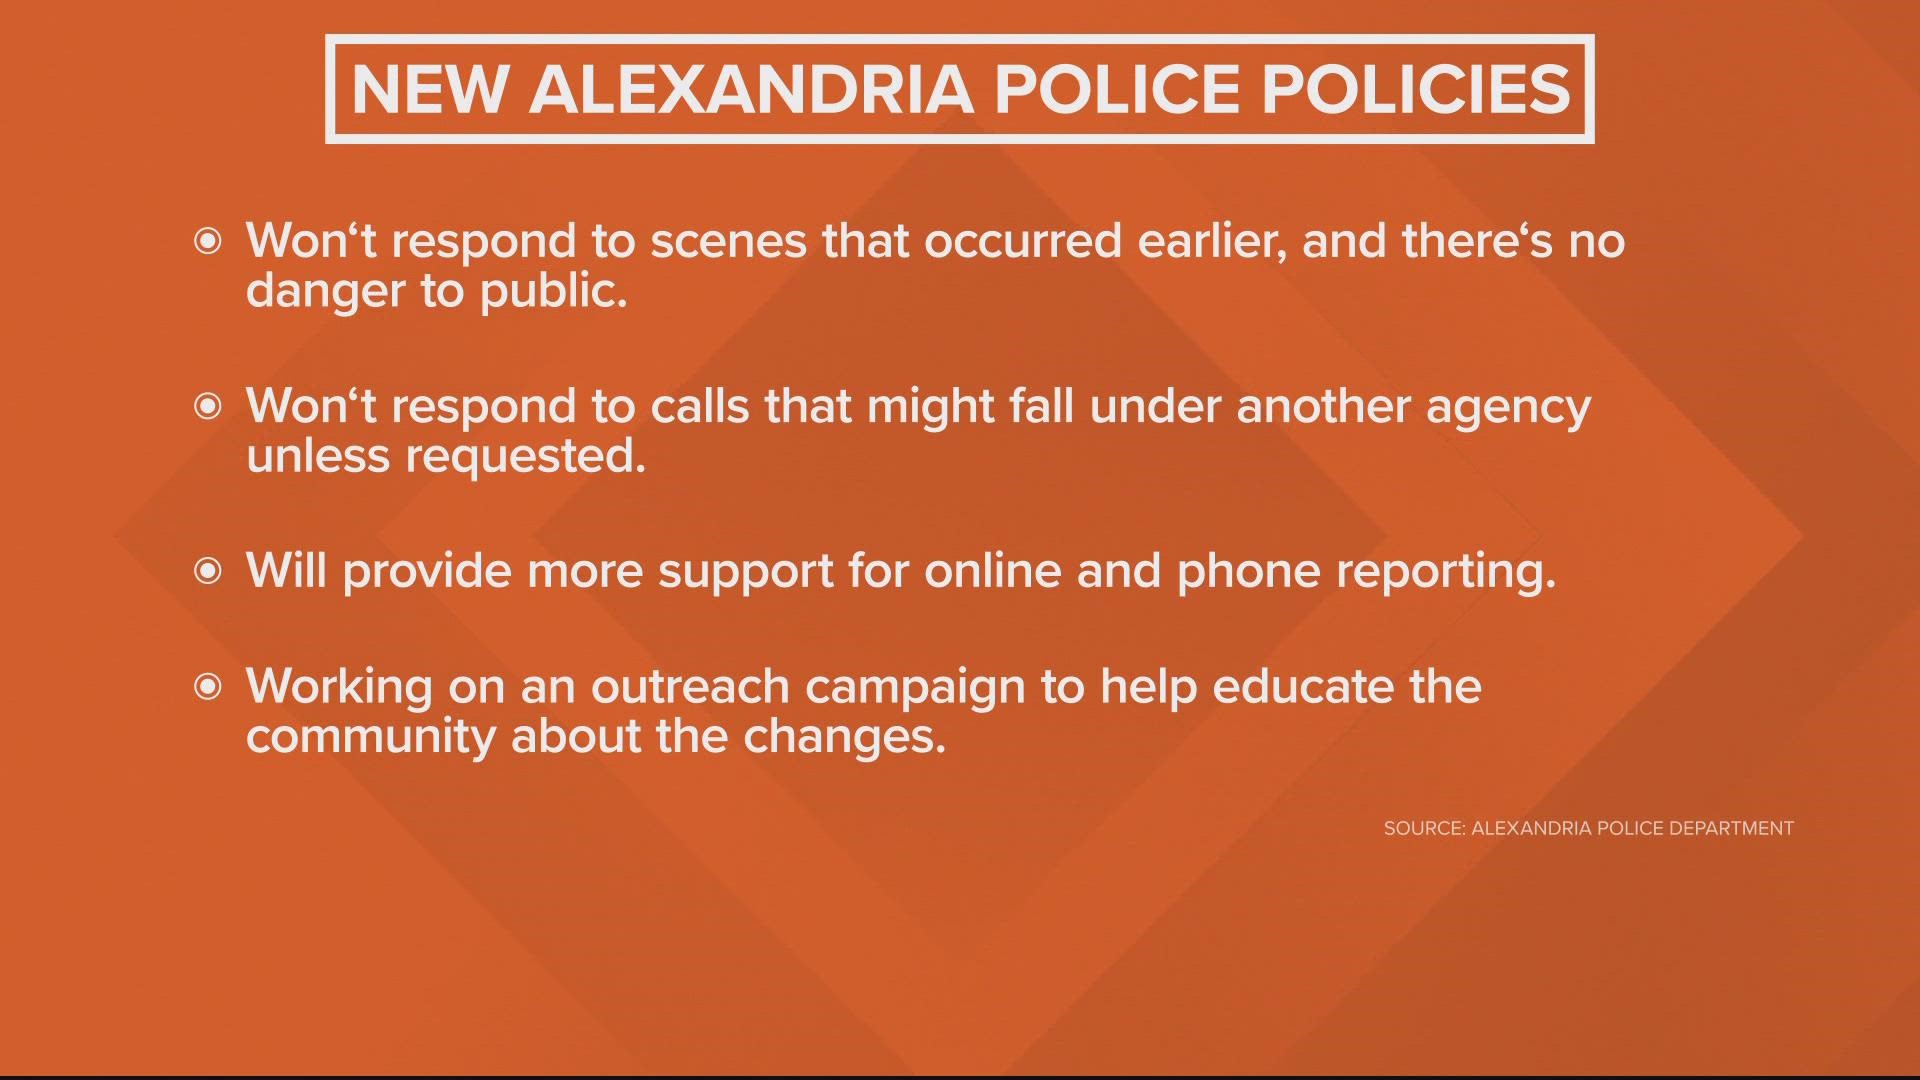 Alexandria Police are making changes because they don't have enough officers.